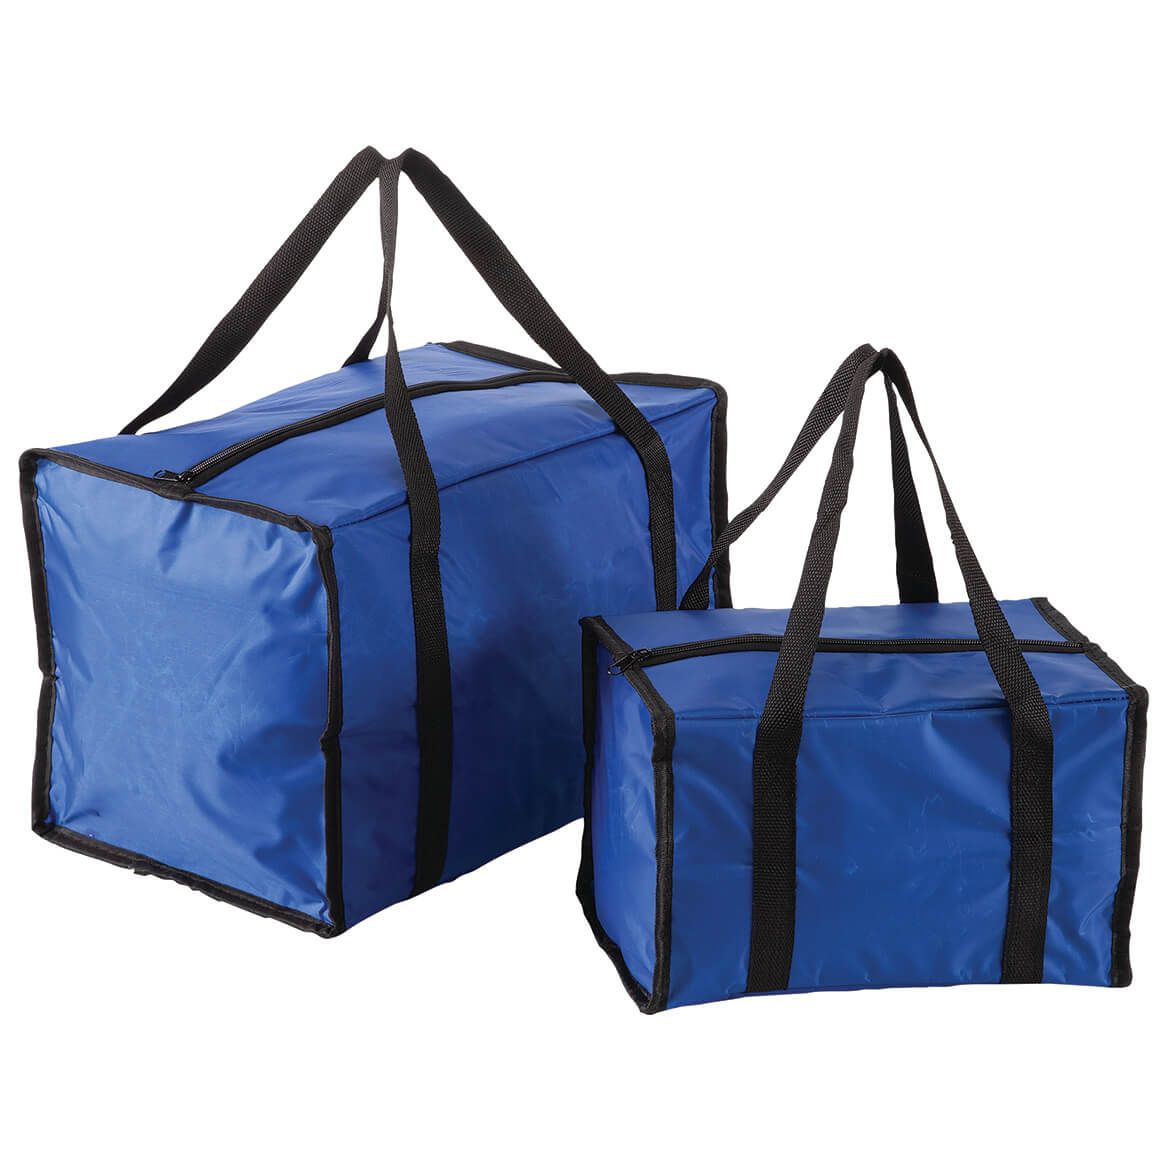 Insulated Blue Tote Bags, Set of 2 + '-' + 376594